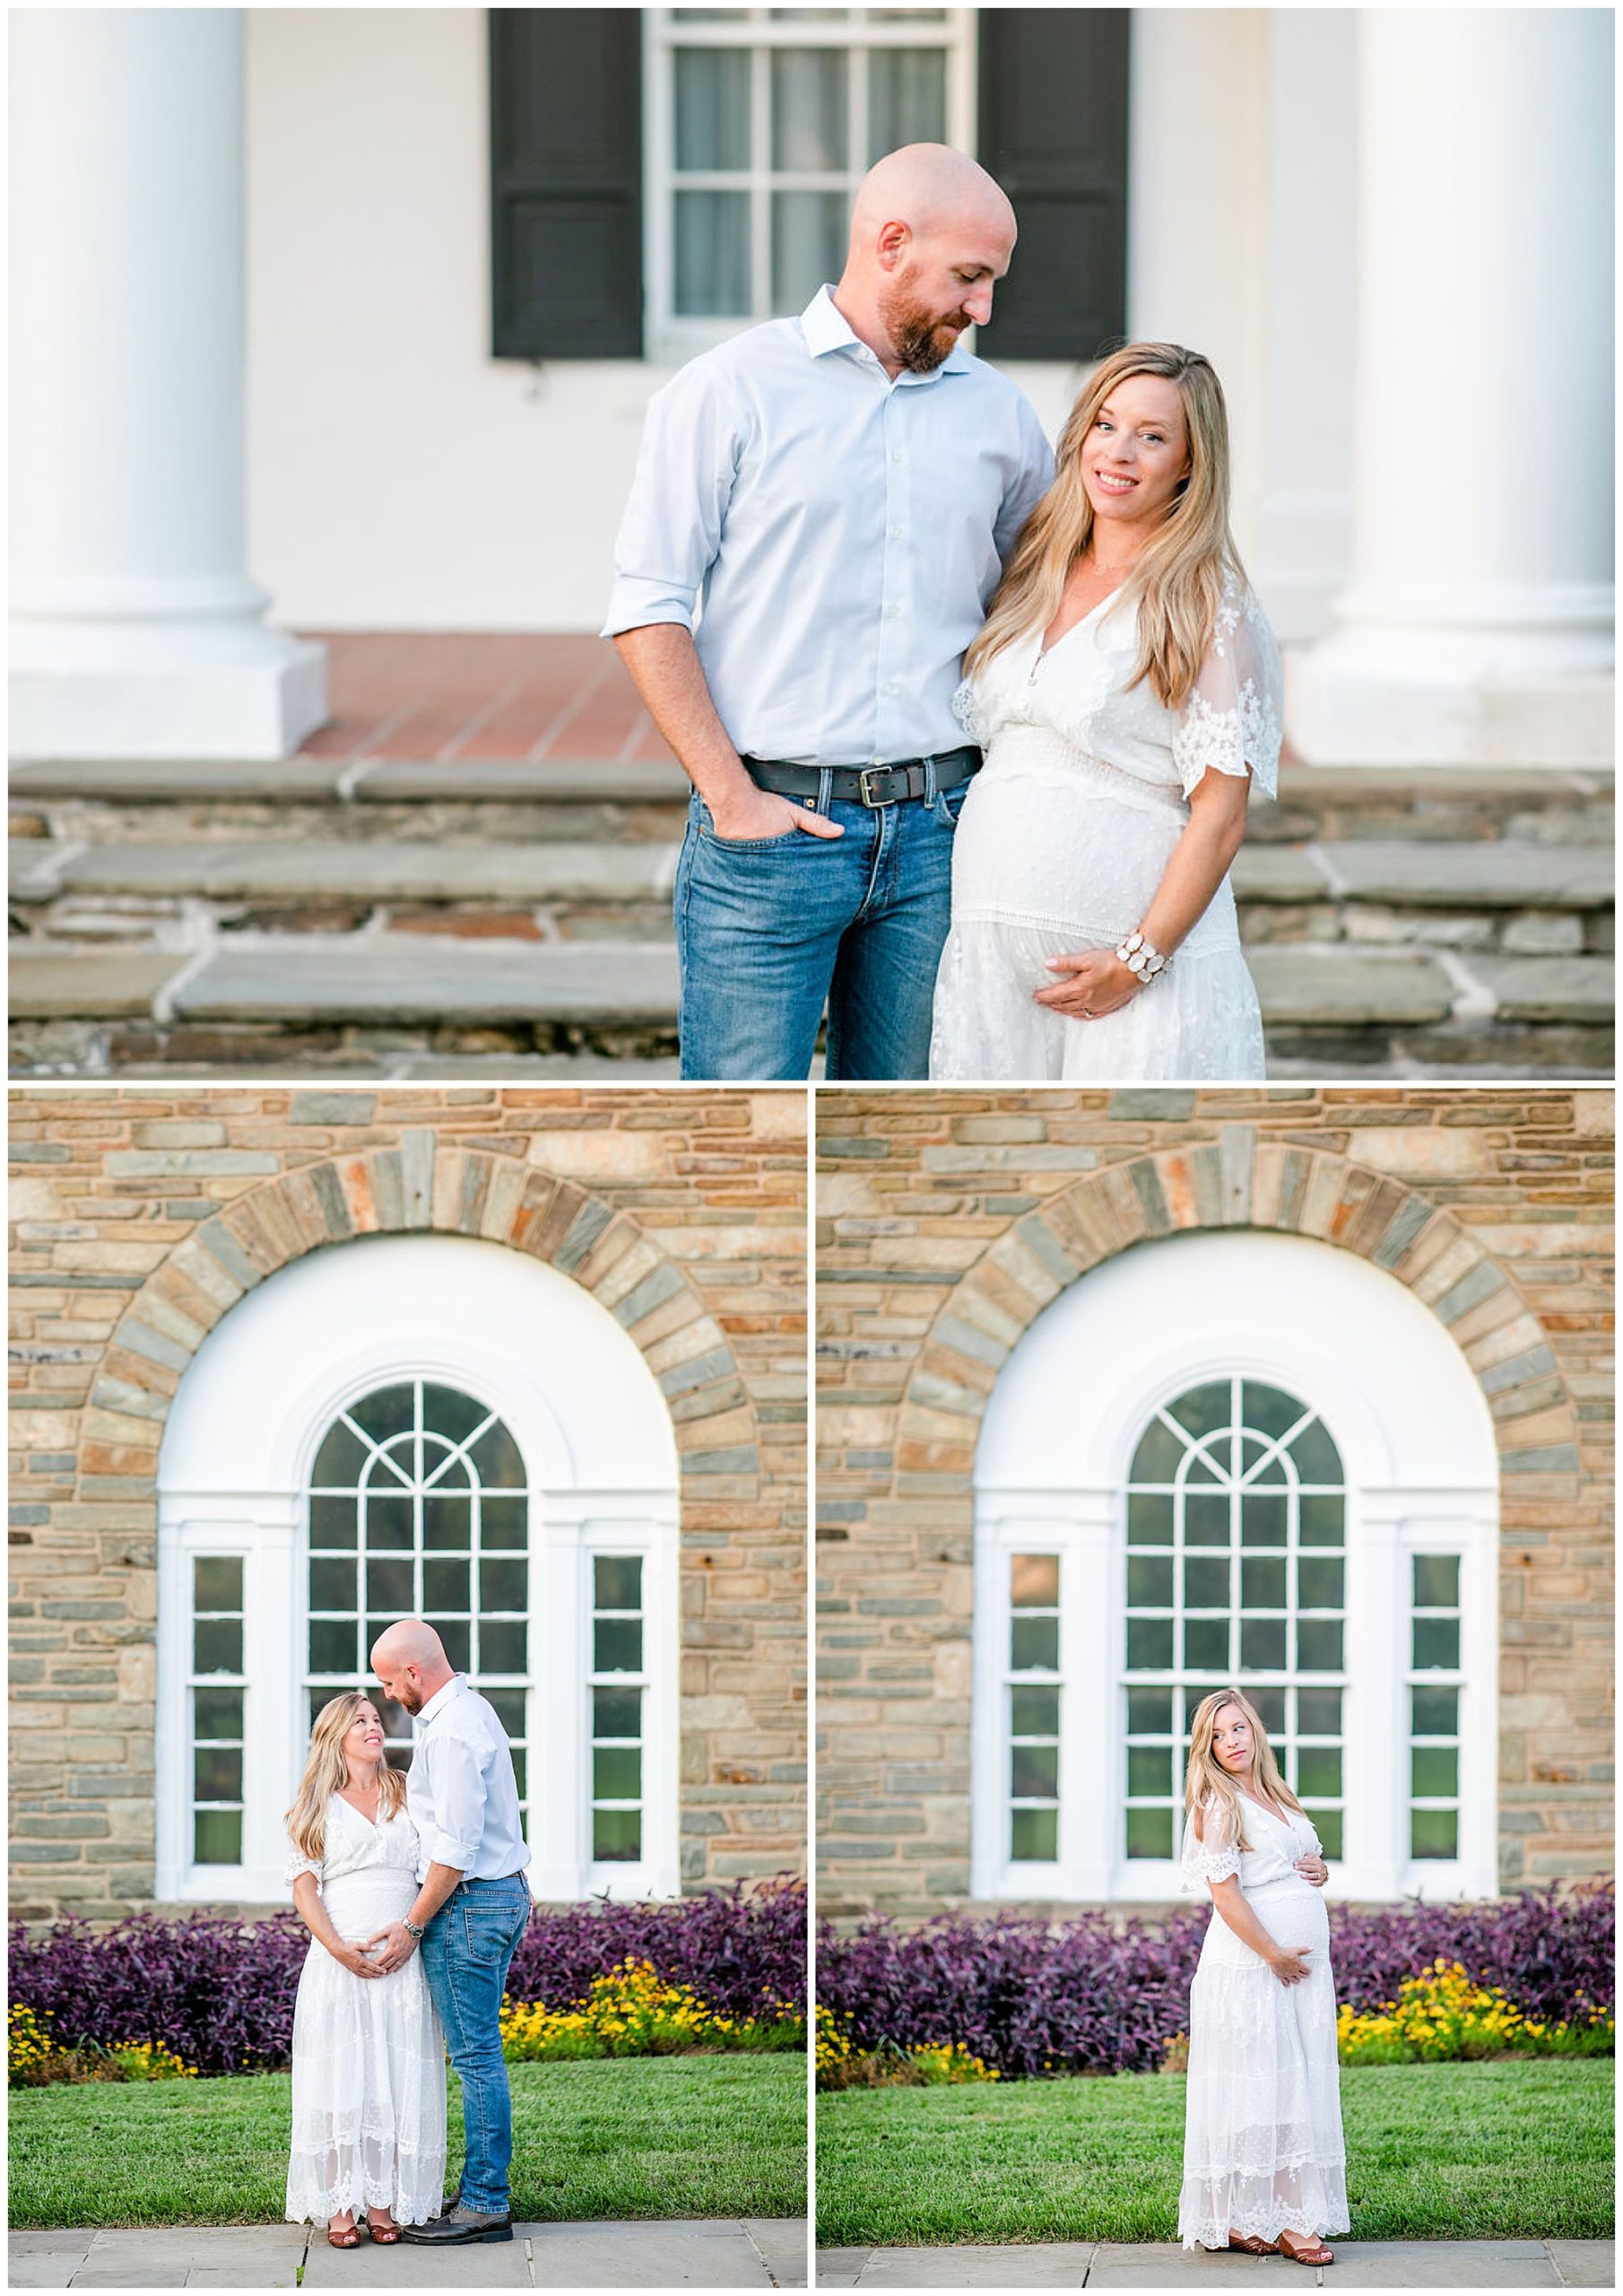 Glenview Mansion maternity session, Glenview Mansion photographer, Glenview Mansion photos, natural light maternity photos, maternity photos outfit ideas, DC photo shoot locations, DC wedding venue, Maryland wedding venue, autumn maternity photos, Rachel E.H. Photography, woman in front of yellow and purple flowers, pregnant woman in white lace dress